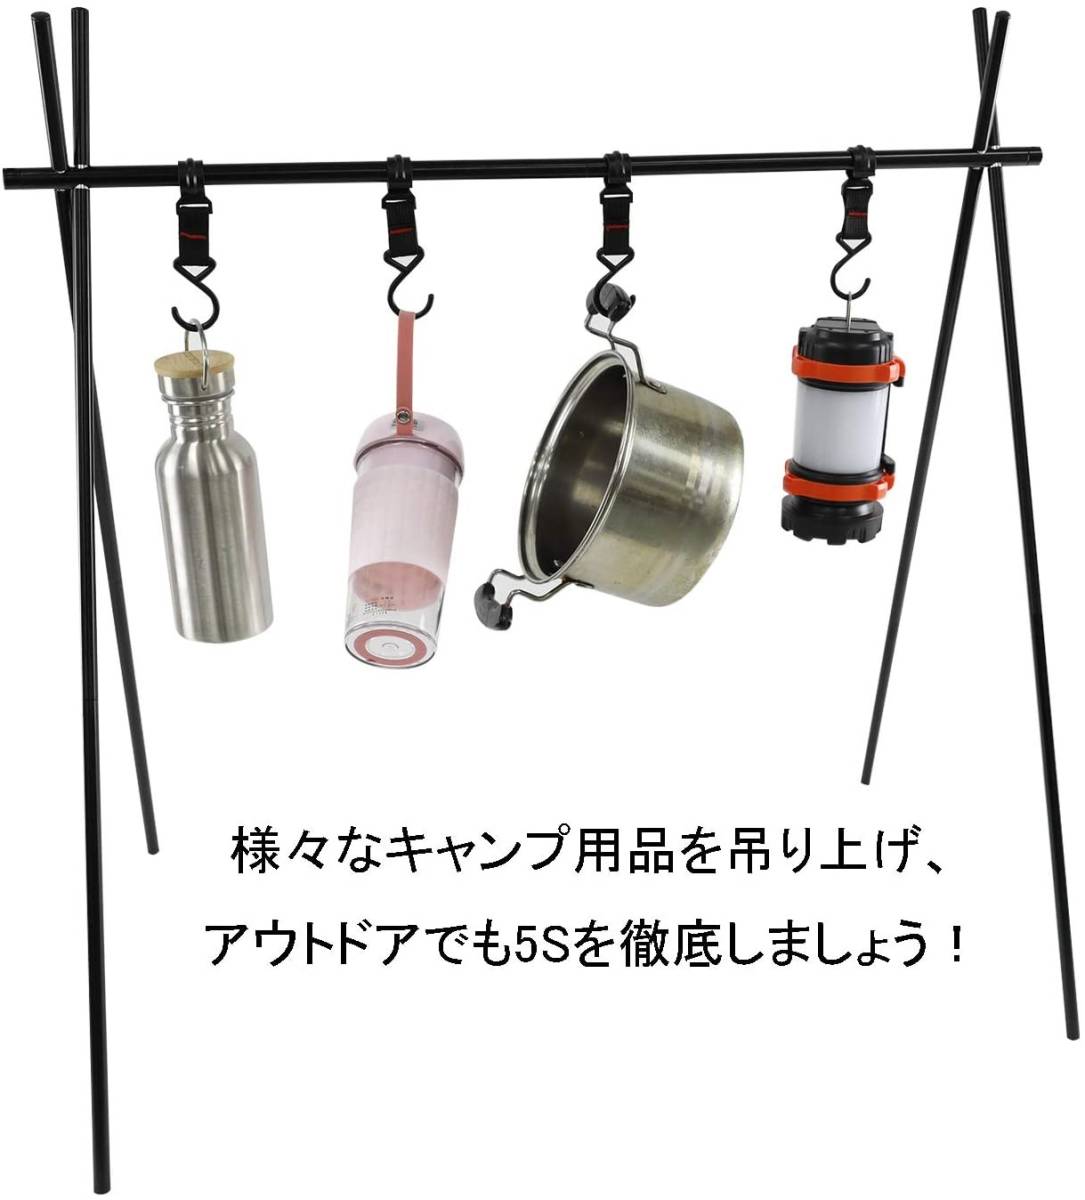 * outdoor * hanger rack stand * lantern stand * camping stand * hanging rack * case attaching * small articles .. stand *M*5